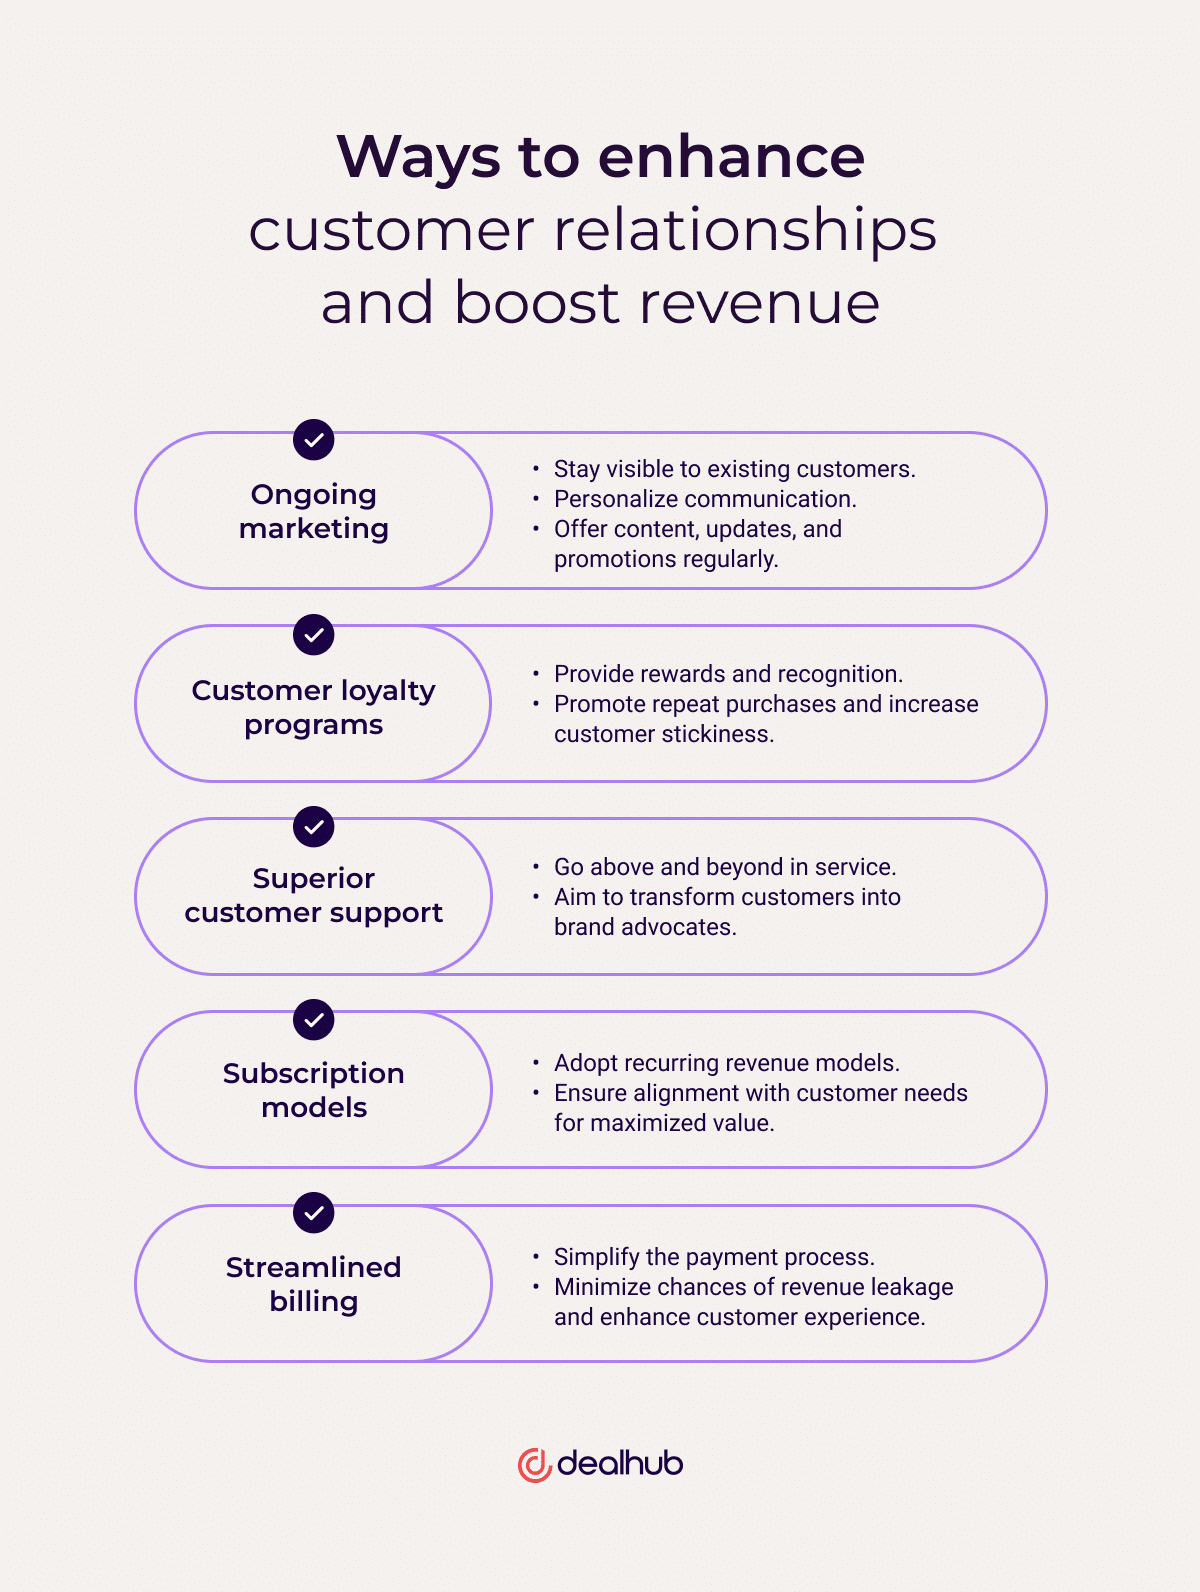 Energize your customer relationships to grow revenue